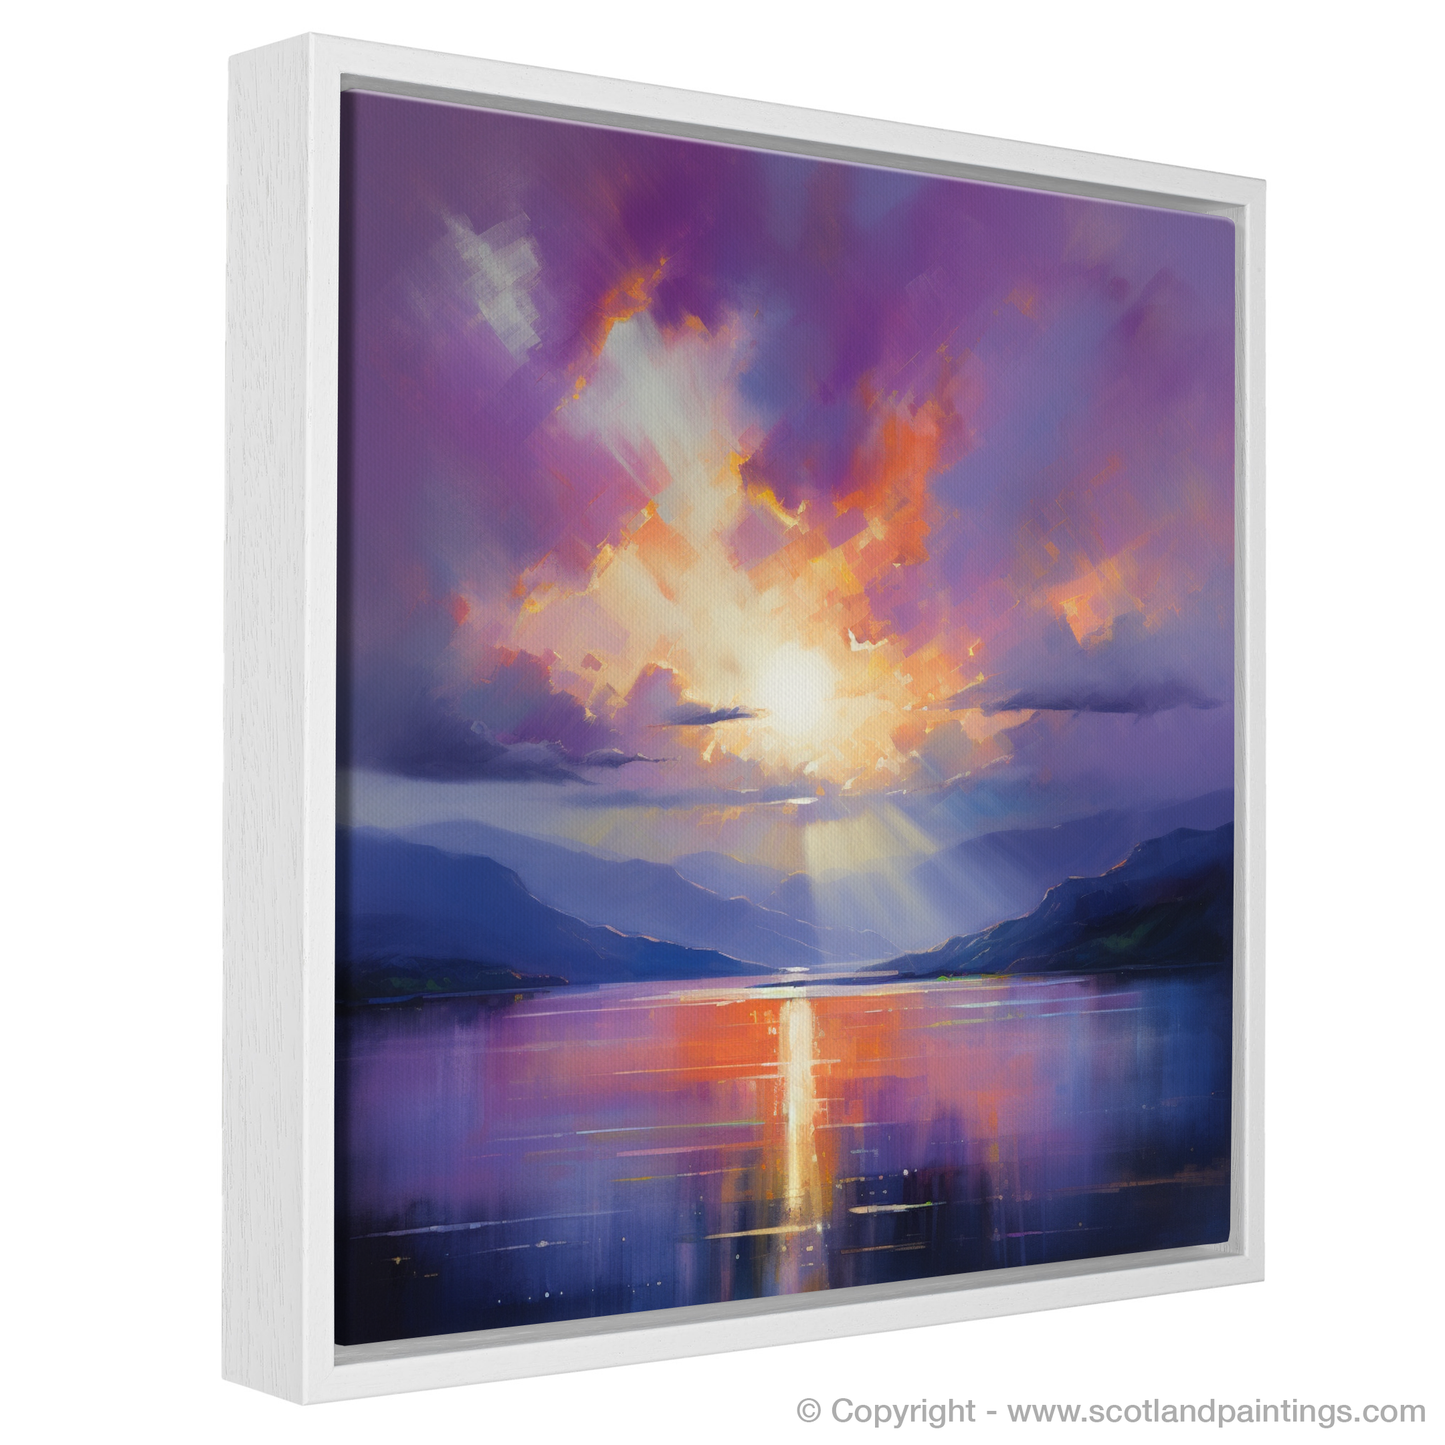 Painting and Art Print of Crepuscular rays above Loch Lomond entitled "Crepuscular Radiance over Loch Lomond".